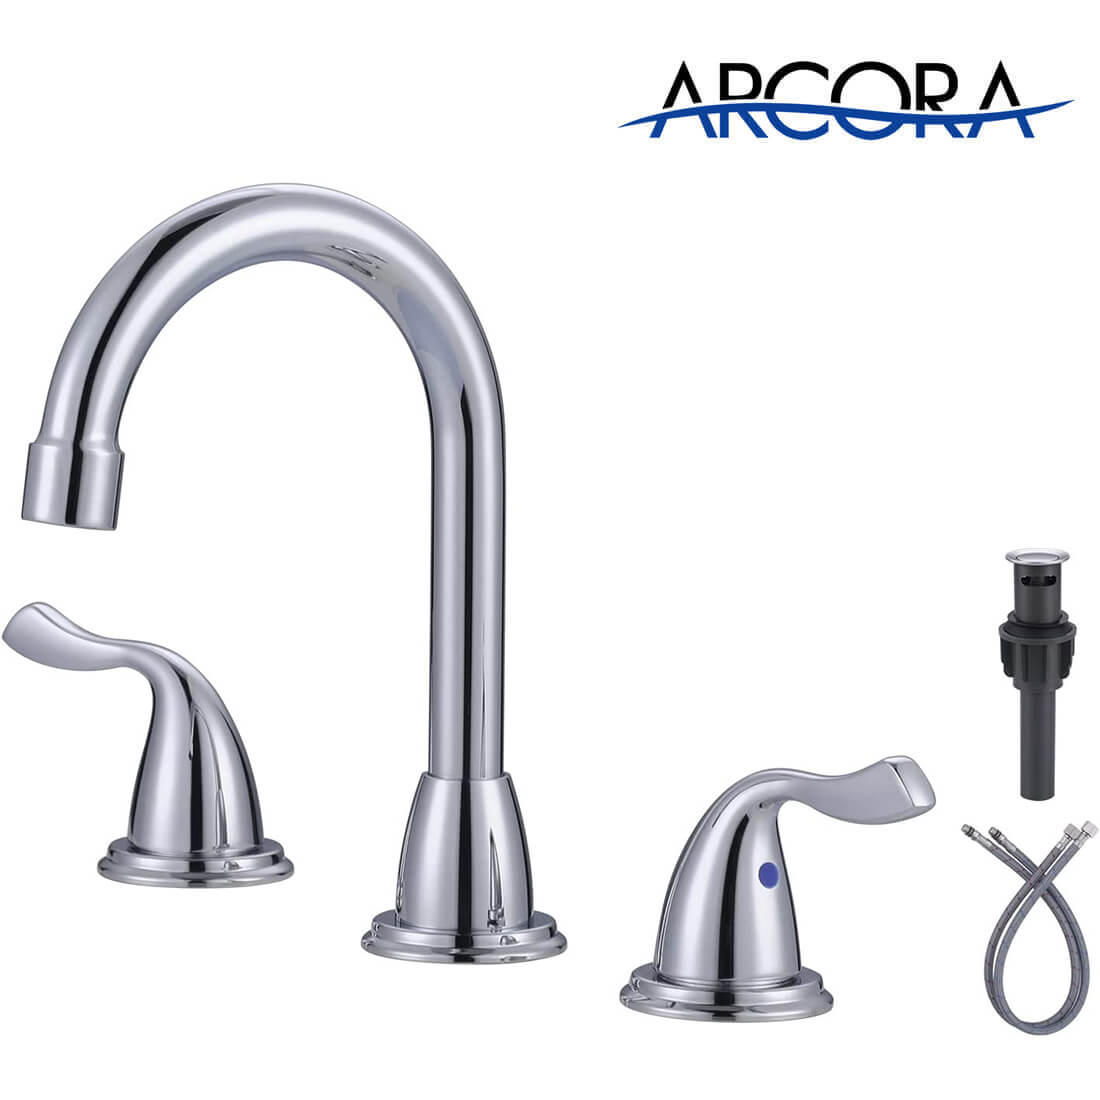 ARCORA 8 Inch Widespread Chrome Bathroom Faucet with Drain Assembly